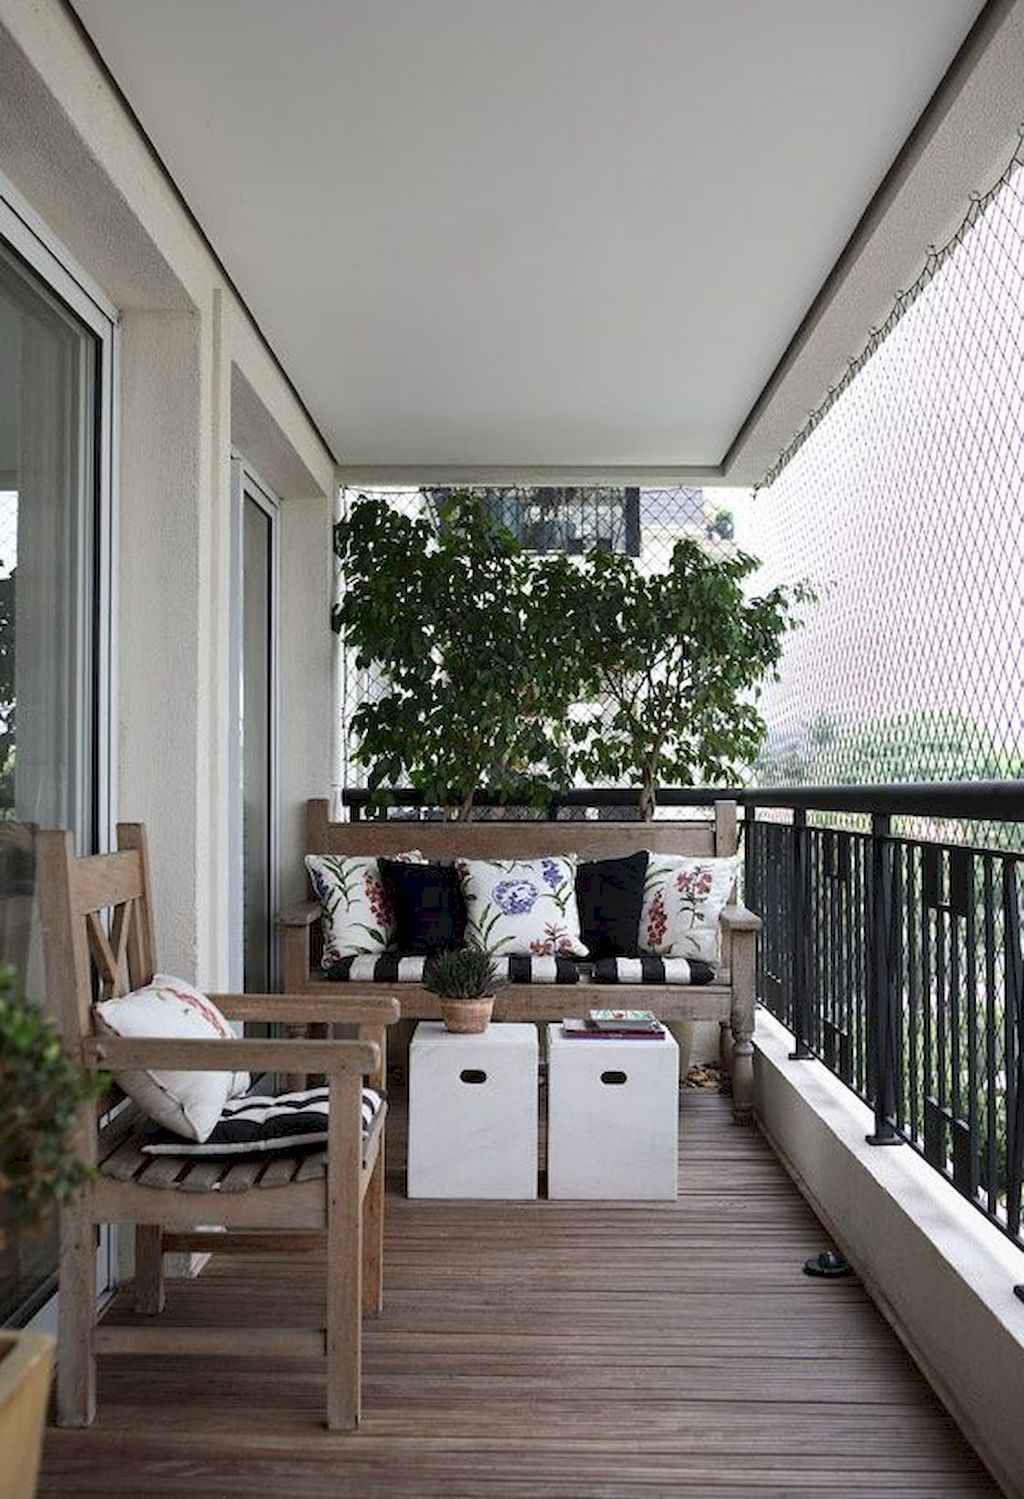 75 Cozy Apartment Balcony Decorating Ideas – Structhome | Small With Coffee Tables For Balconies (View 4 of 20)